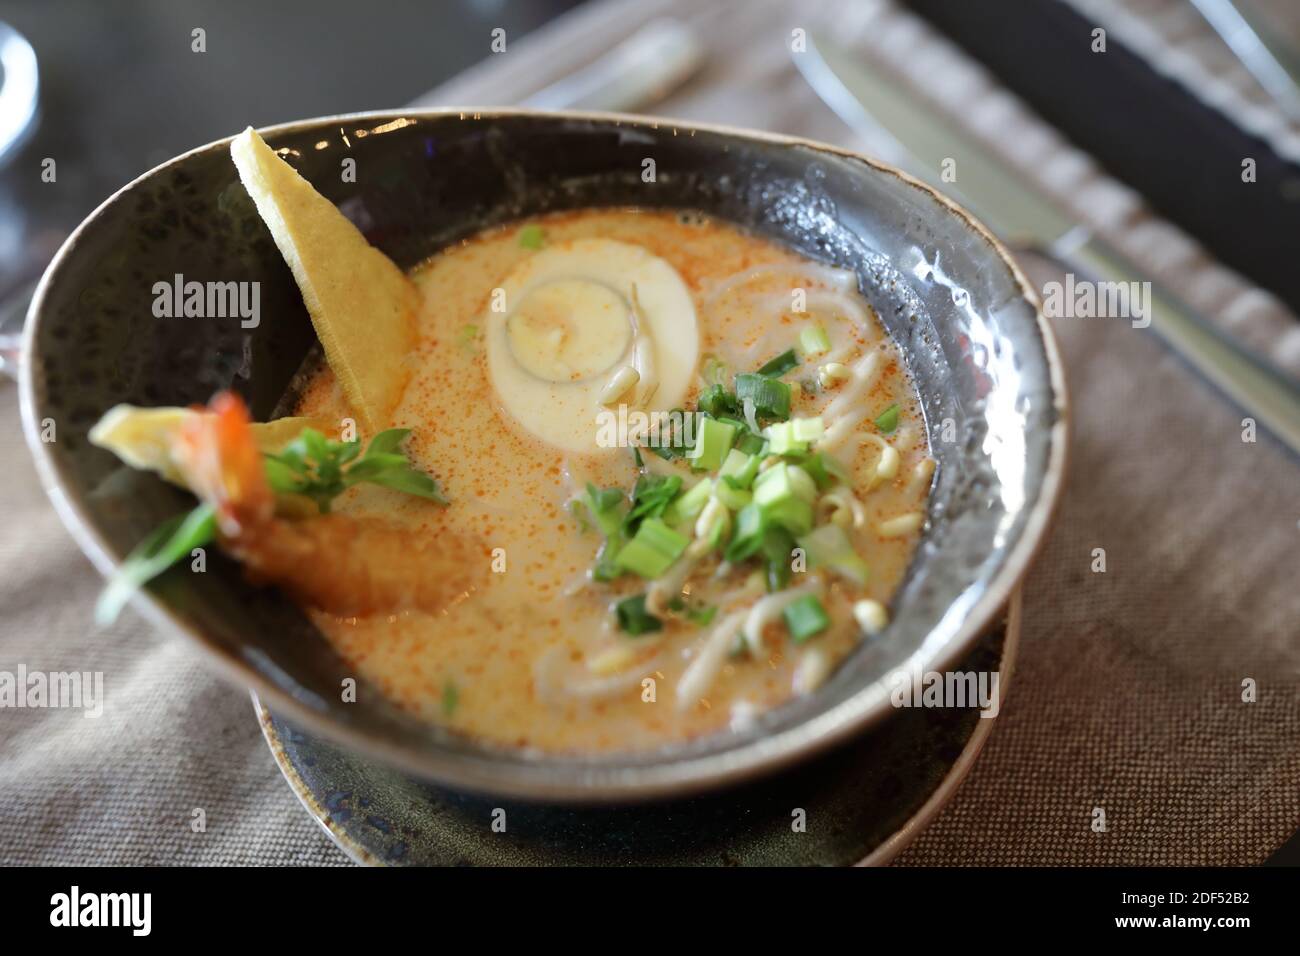 Bowl of seafood soup on table in restaurant Stock Photo